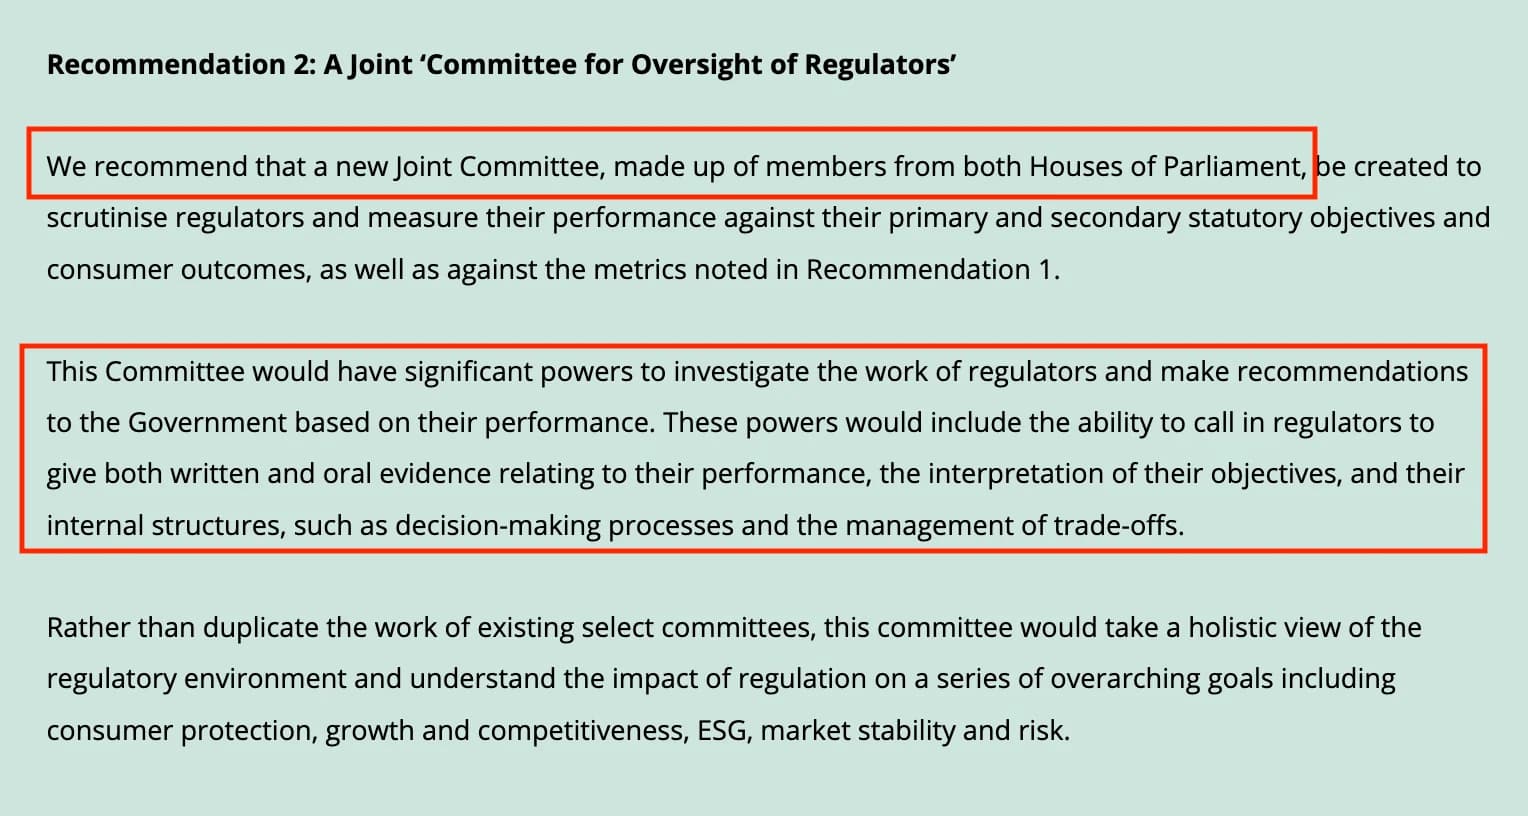 SCREENSHOT FROM RRG PROPOSAL WHO SEEK TO HAVE SIGNIFICANT POWER OVER THE UK REGULATORS